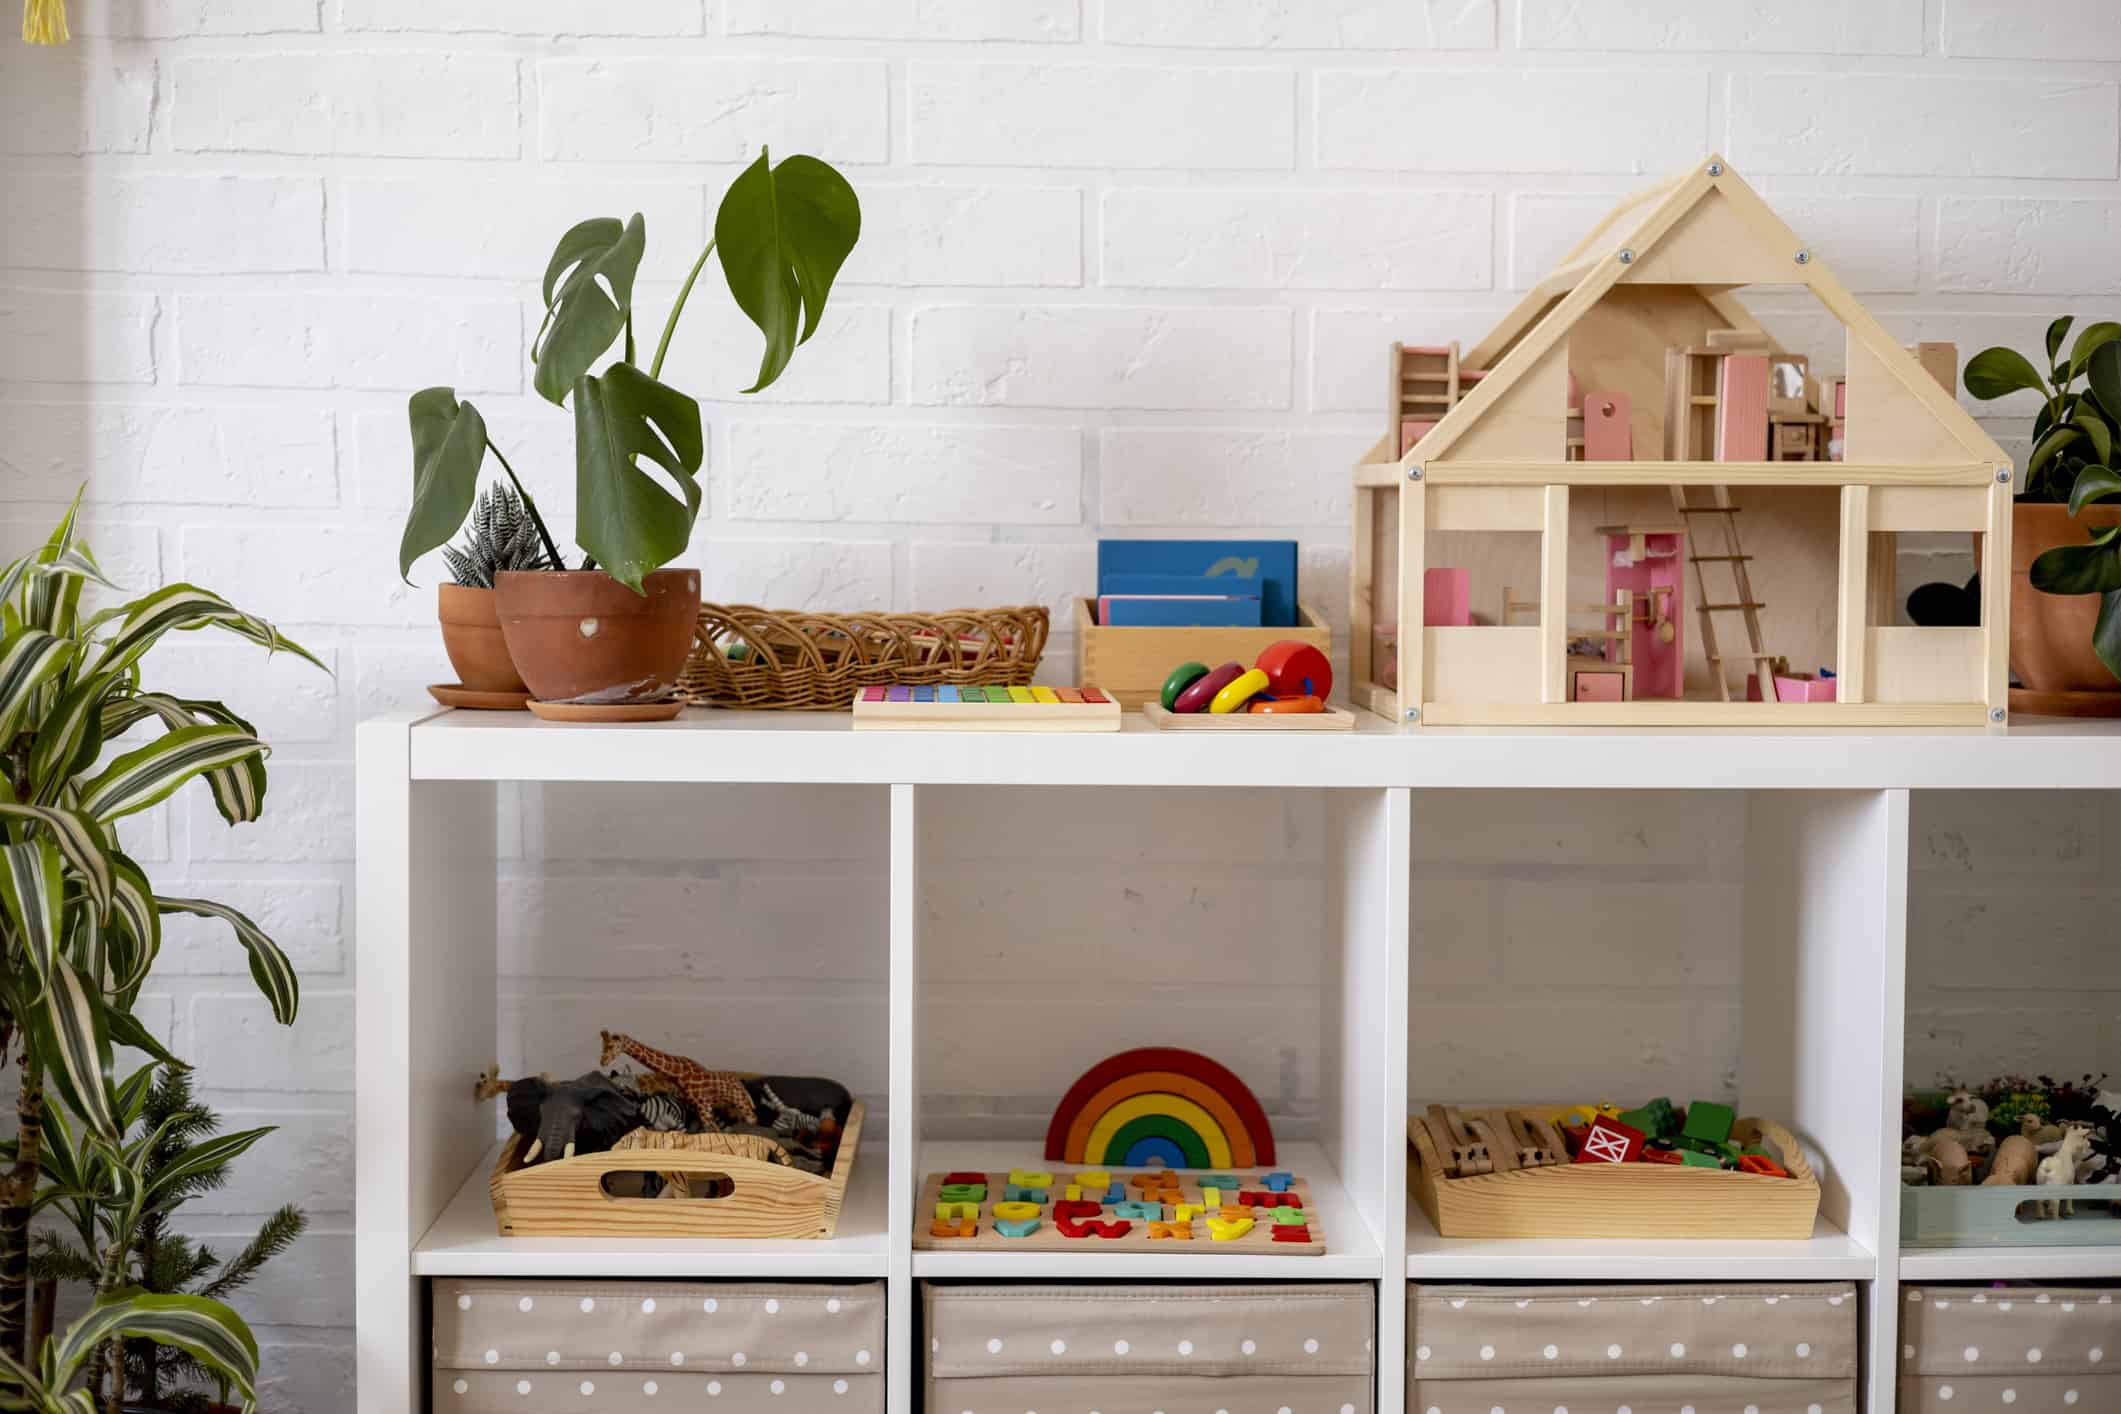 Material for Montessori school. White shelves in a room with neatly arranged toys.